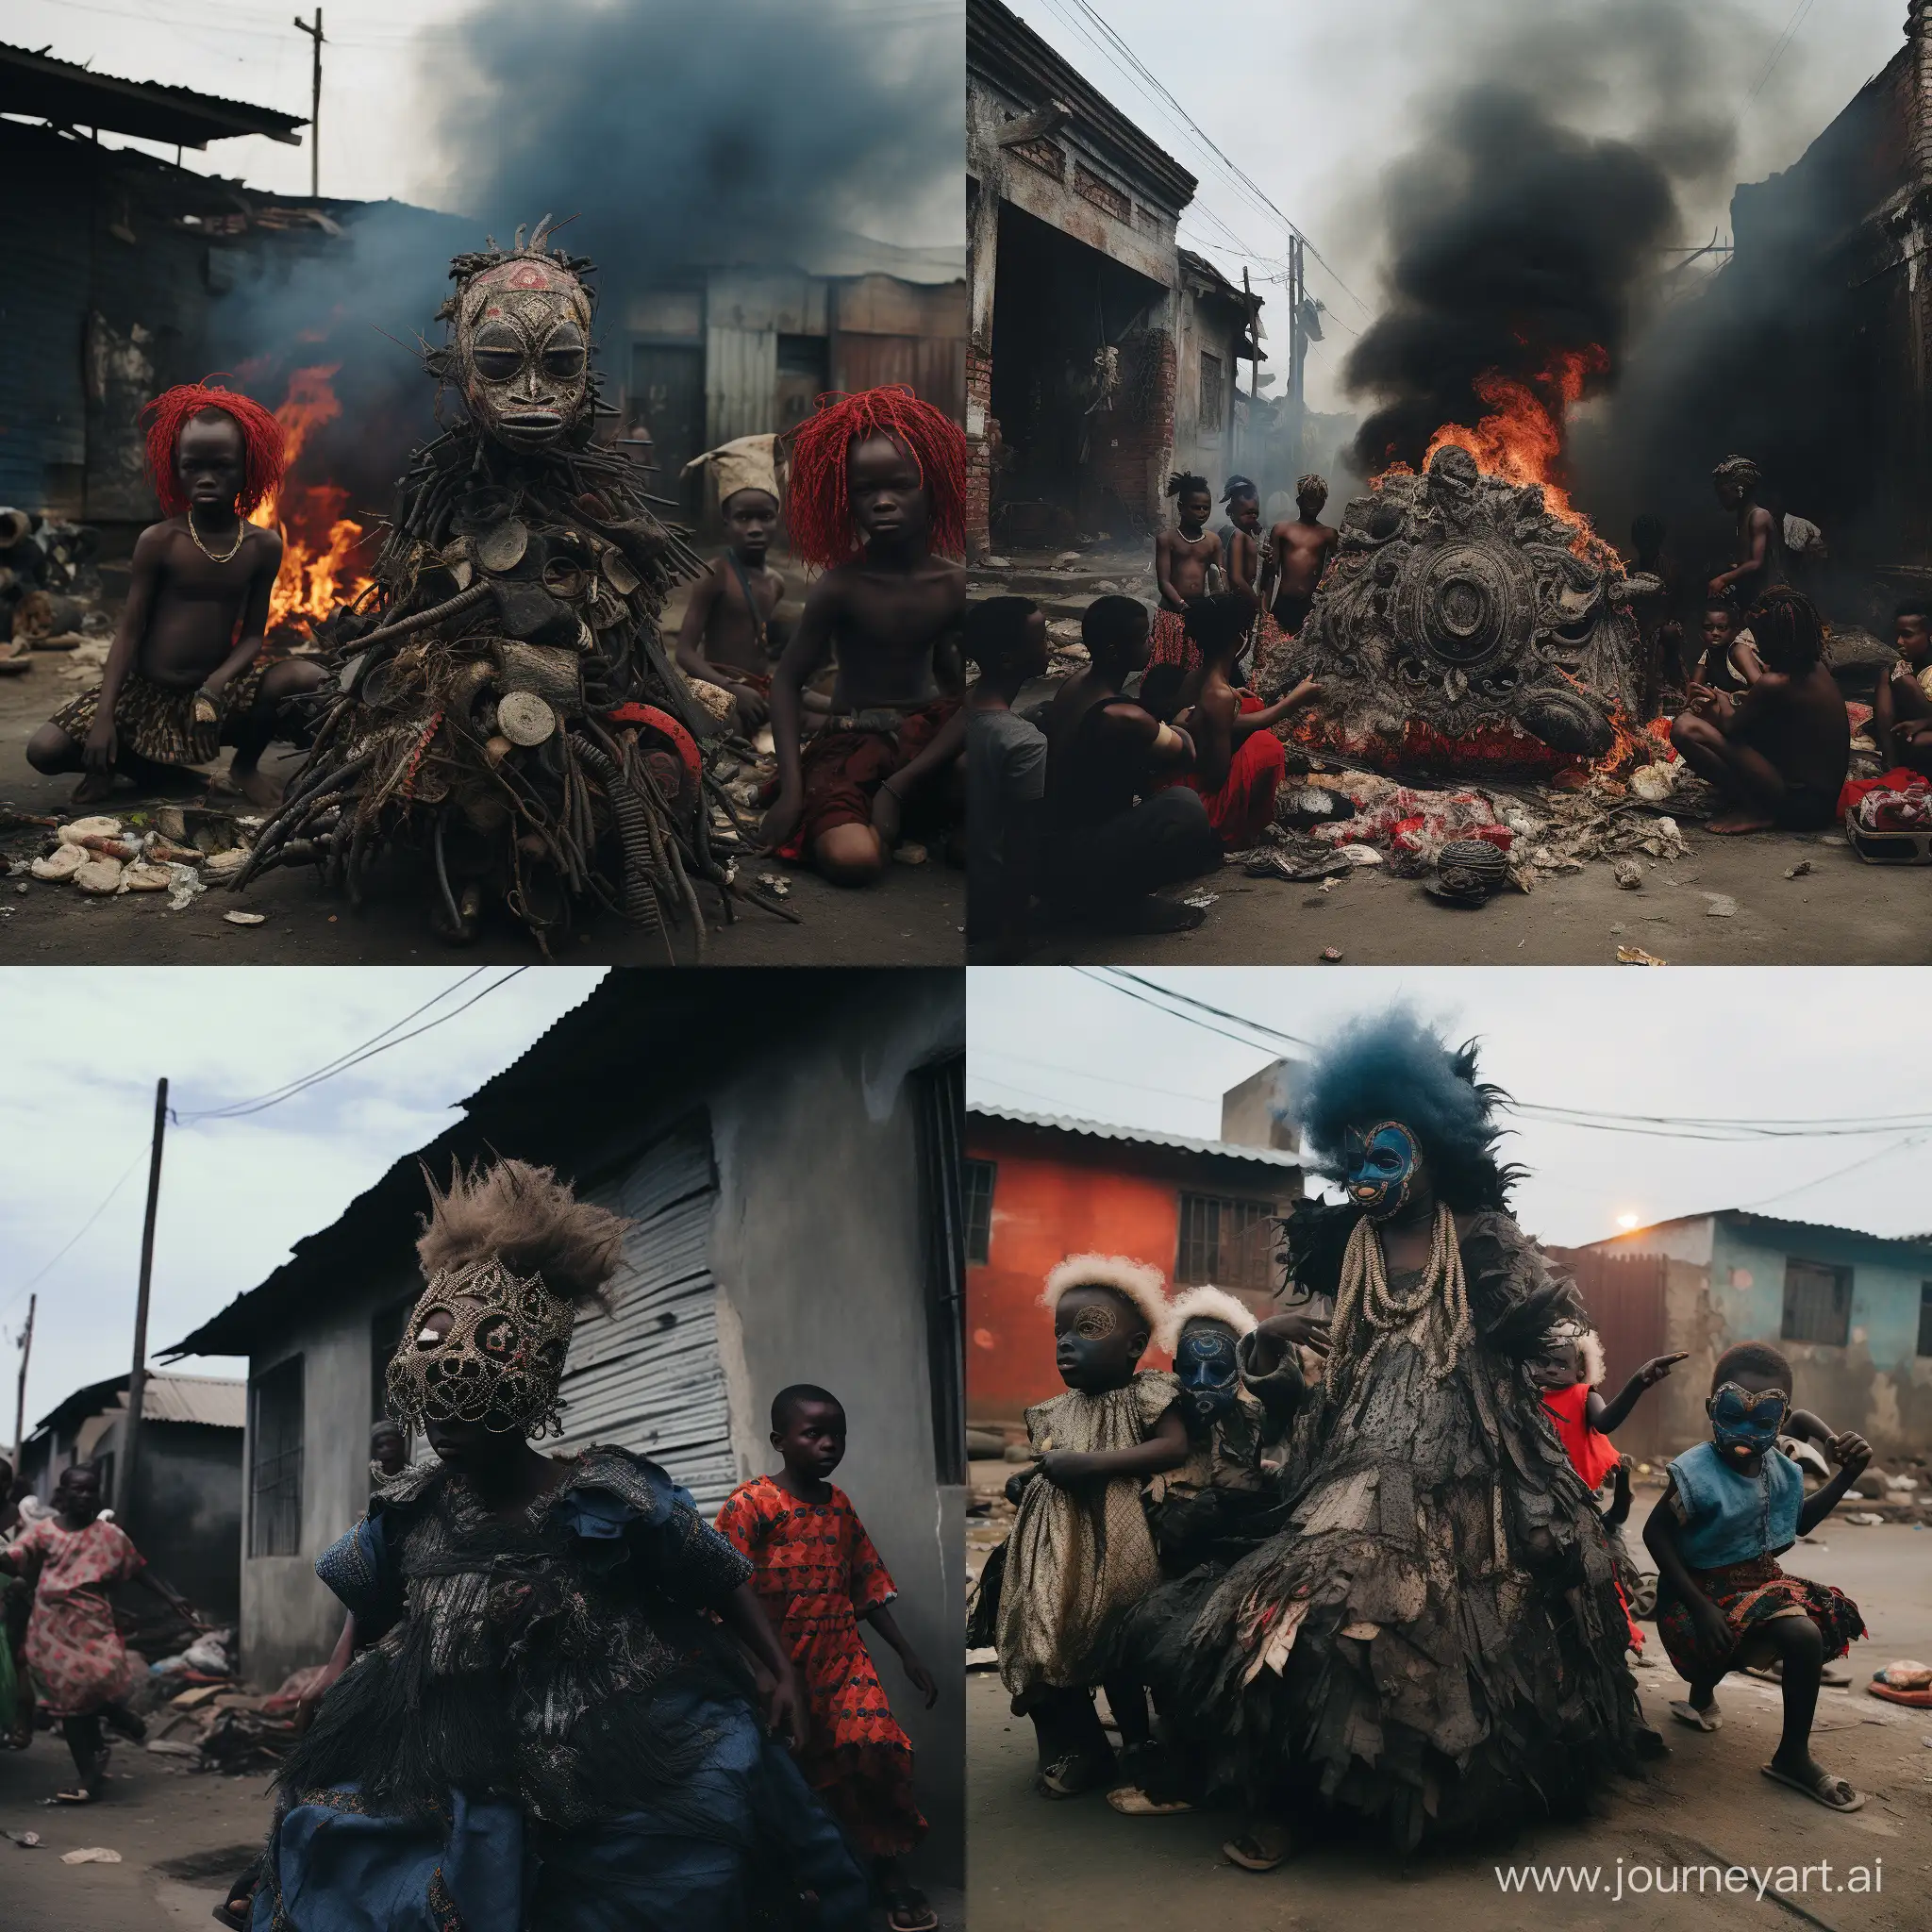 editorial photo for trap album cover, in a street, in the background burning tires producing black smoke, front of a slum house, door open with a group of five black children krumping, wearing intricate egungun vodoo masks made with fabric, glass, raffia, coton, yarn, porcupine quills, by northcote thomas,  by lucien shapiro, wearing very chic japanese colorful wool coat and front of a tv from 1980 with retro cartoons standing on plastic bar stool, moody cinematic, by jordan